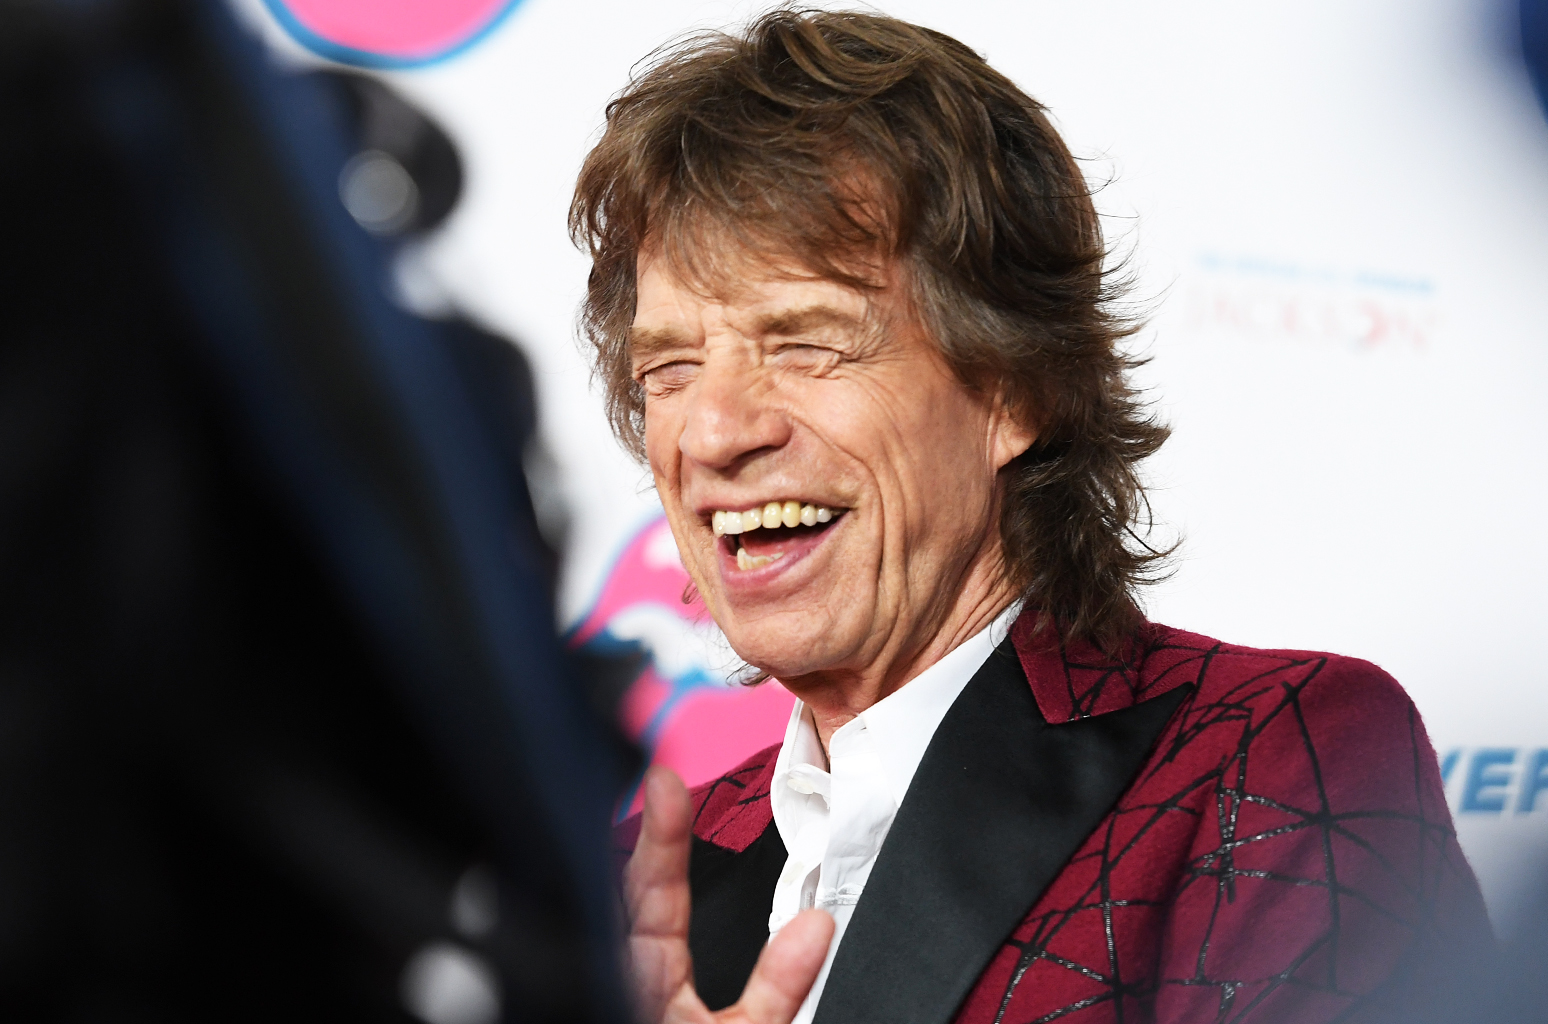 Mick Jagger attends The Rolling Stones North American debut celebration of "Exhibitionism" at Industria in the West Village on November 15, 2016 in New York City. / AFP / ANGELA WEISS (Photo credit should read ANGELA WEISS/AFP/Getty Images) 